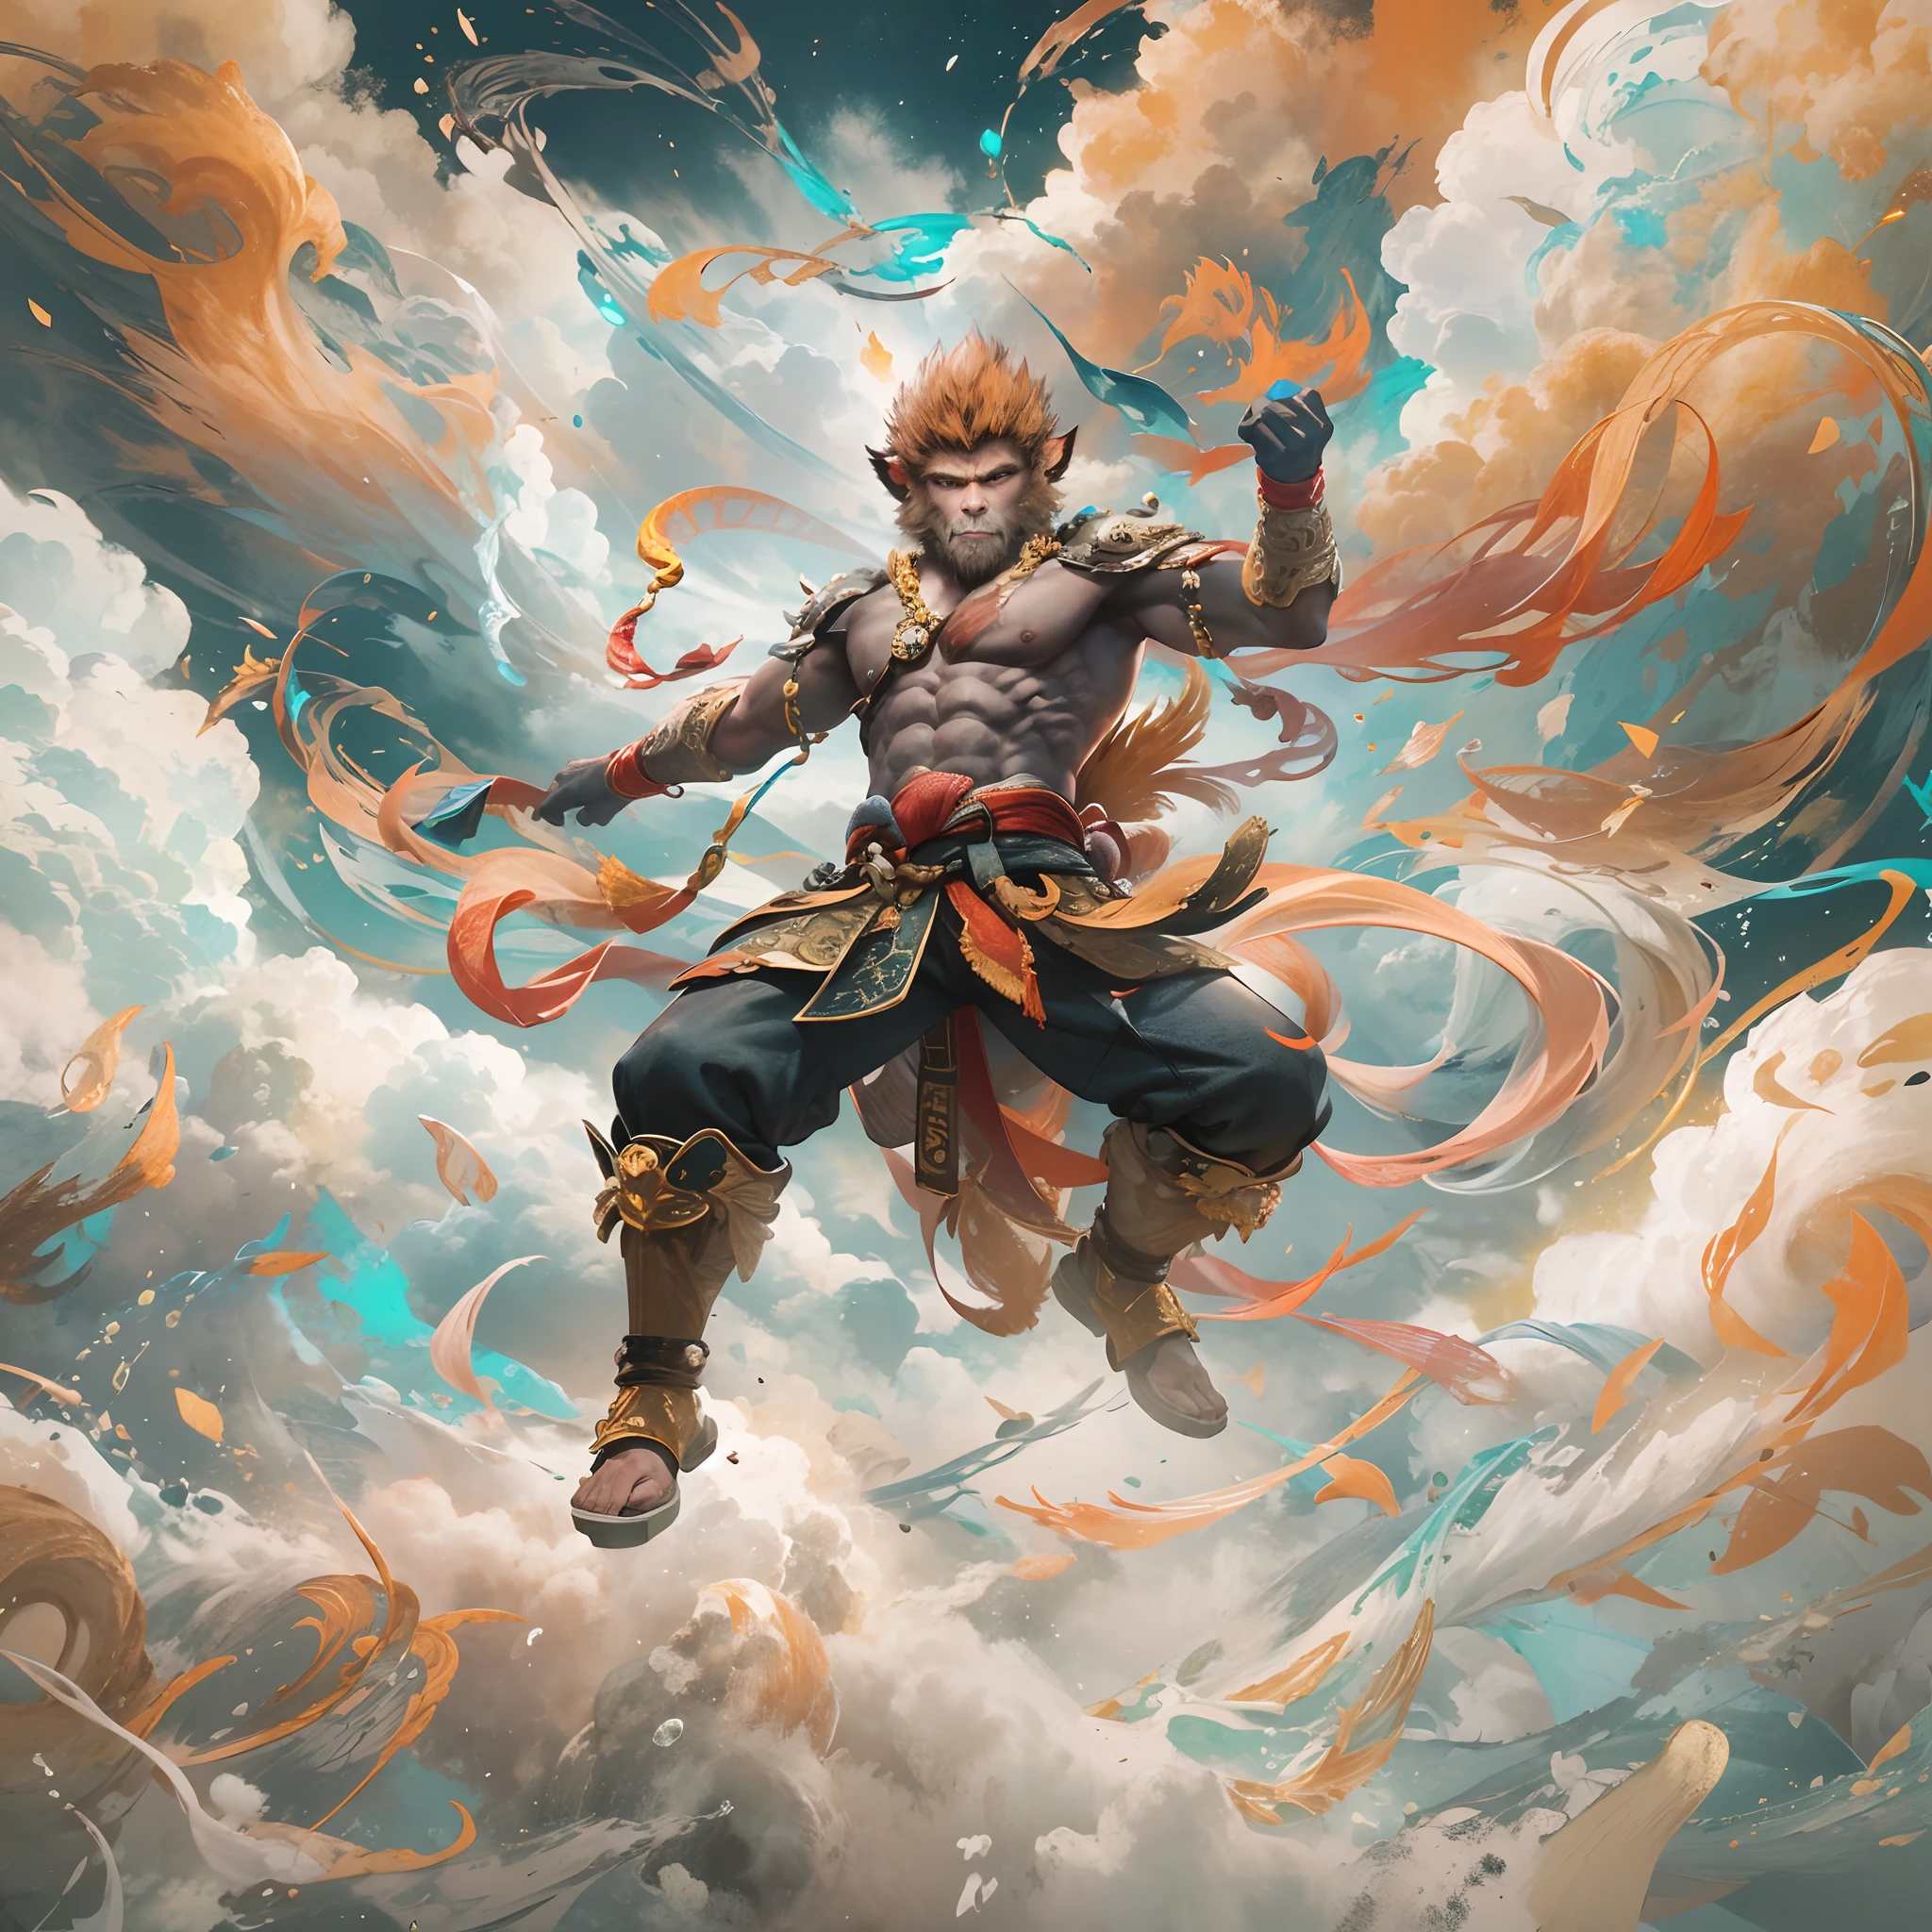 Colorful clouds，Dancing in the sky, wukong \(black myth\),  Ink painting style, Clean colors, decisive cutting, White space, freehand brushwork, Soft lighting，dreamy glow， ( Bokeh)，Masterpiece, Super detailed, Epic composition, Highest quality, 4K，